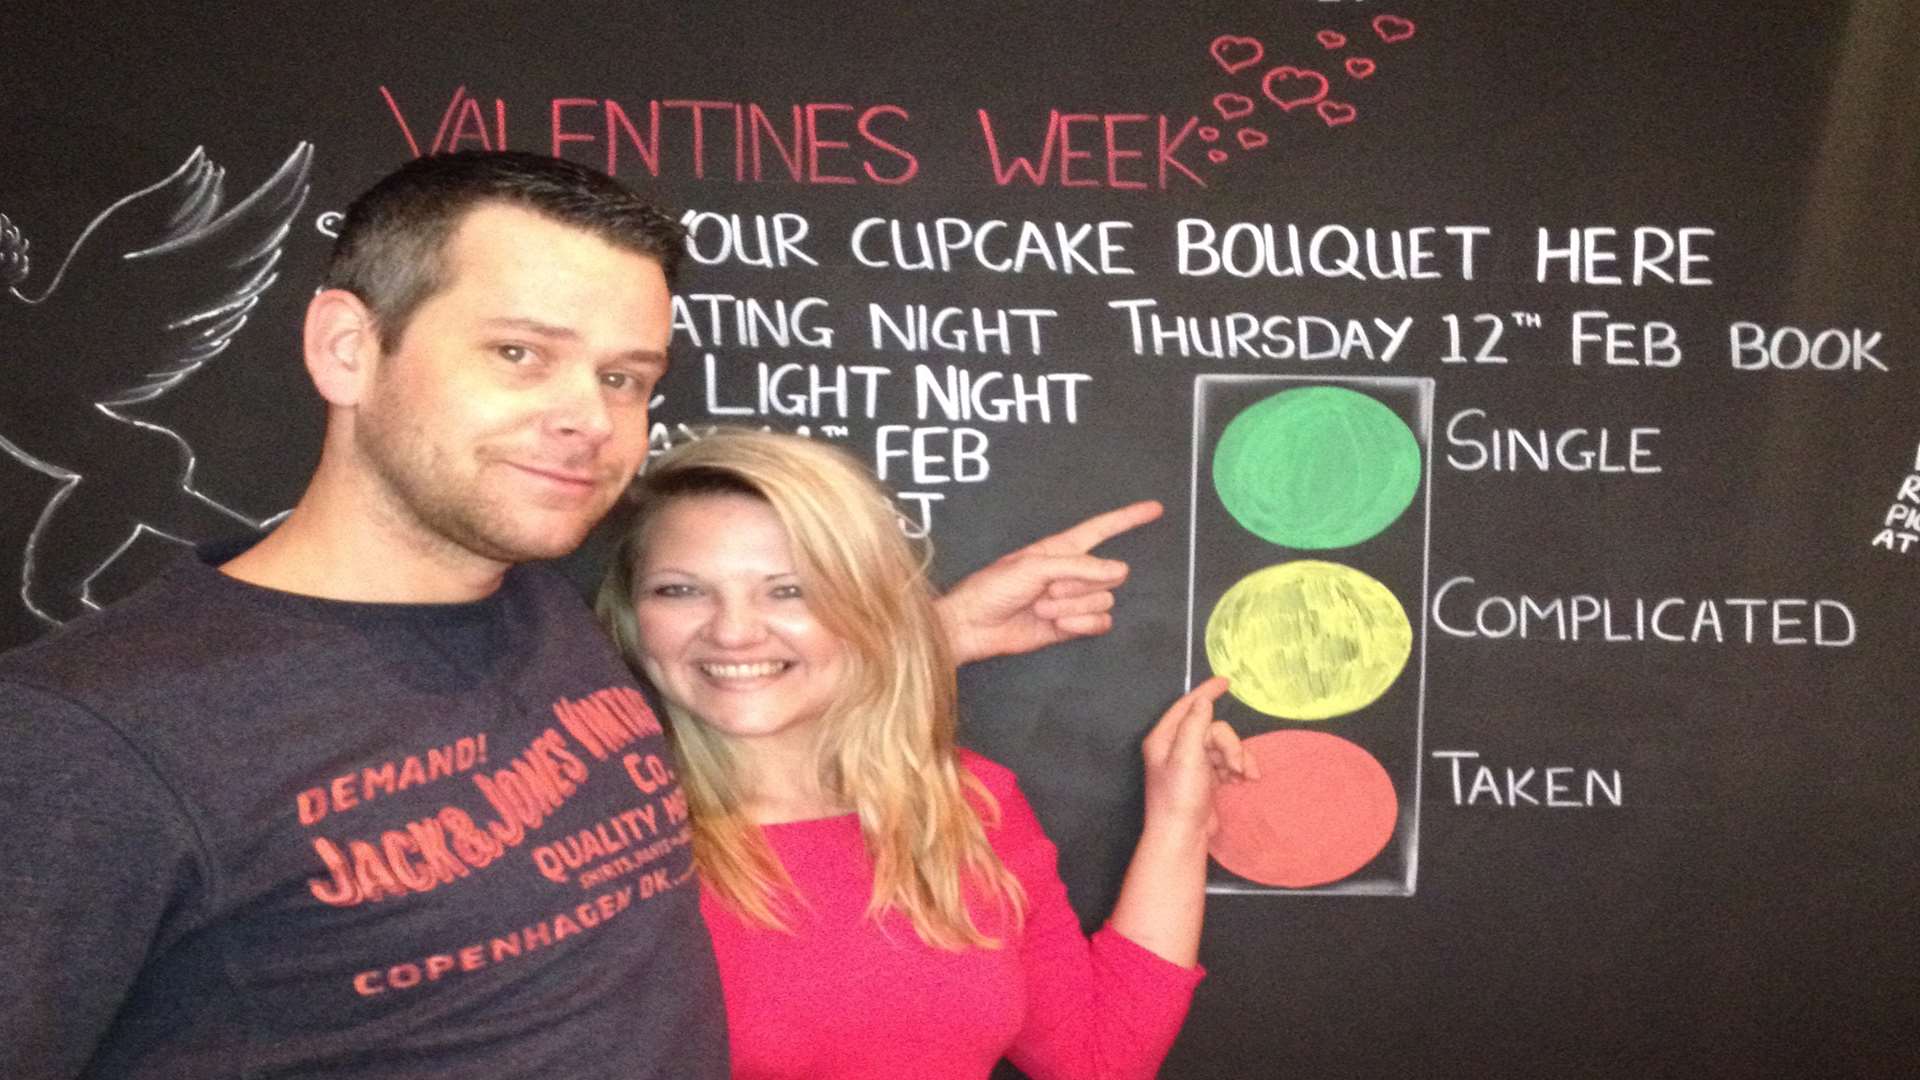 Chris Vidler and Anna Murray are inviting you to The Lane's speed dating night and traffic light party